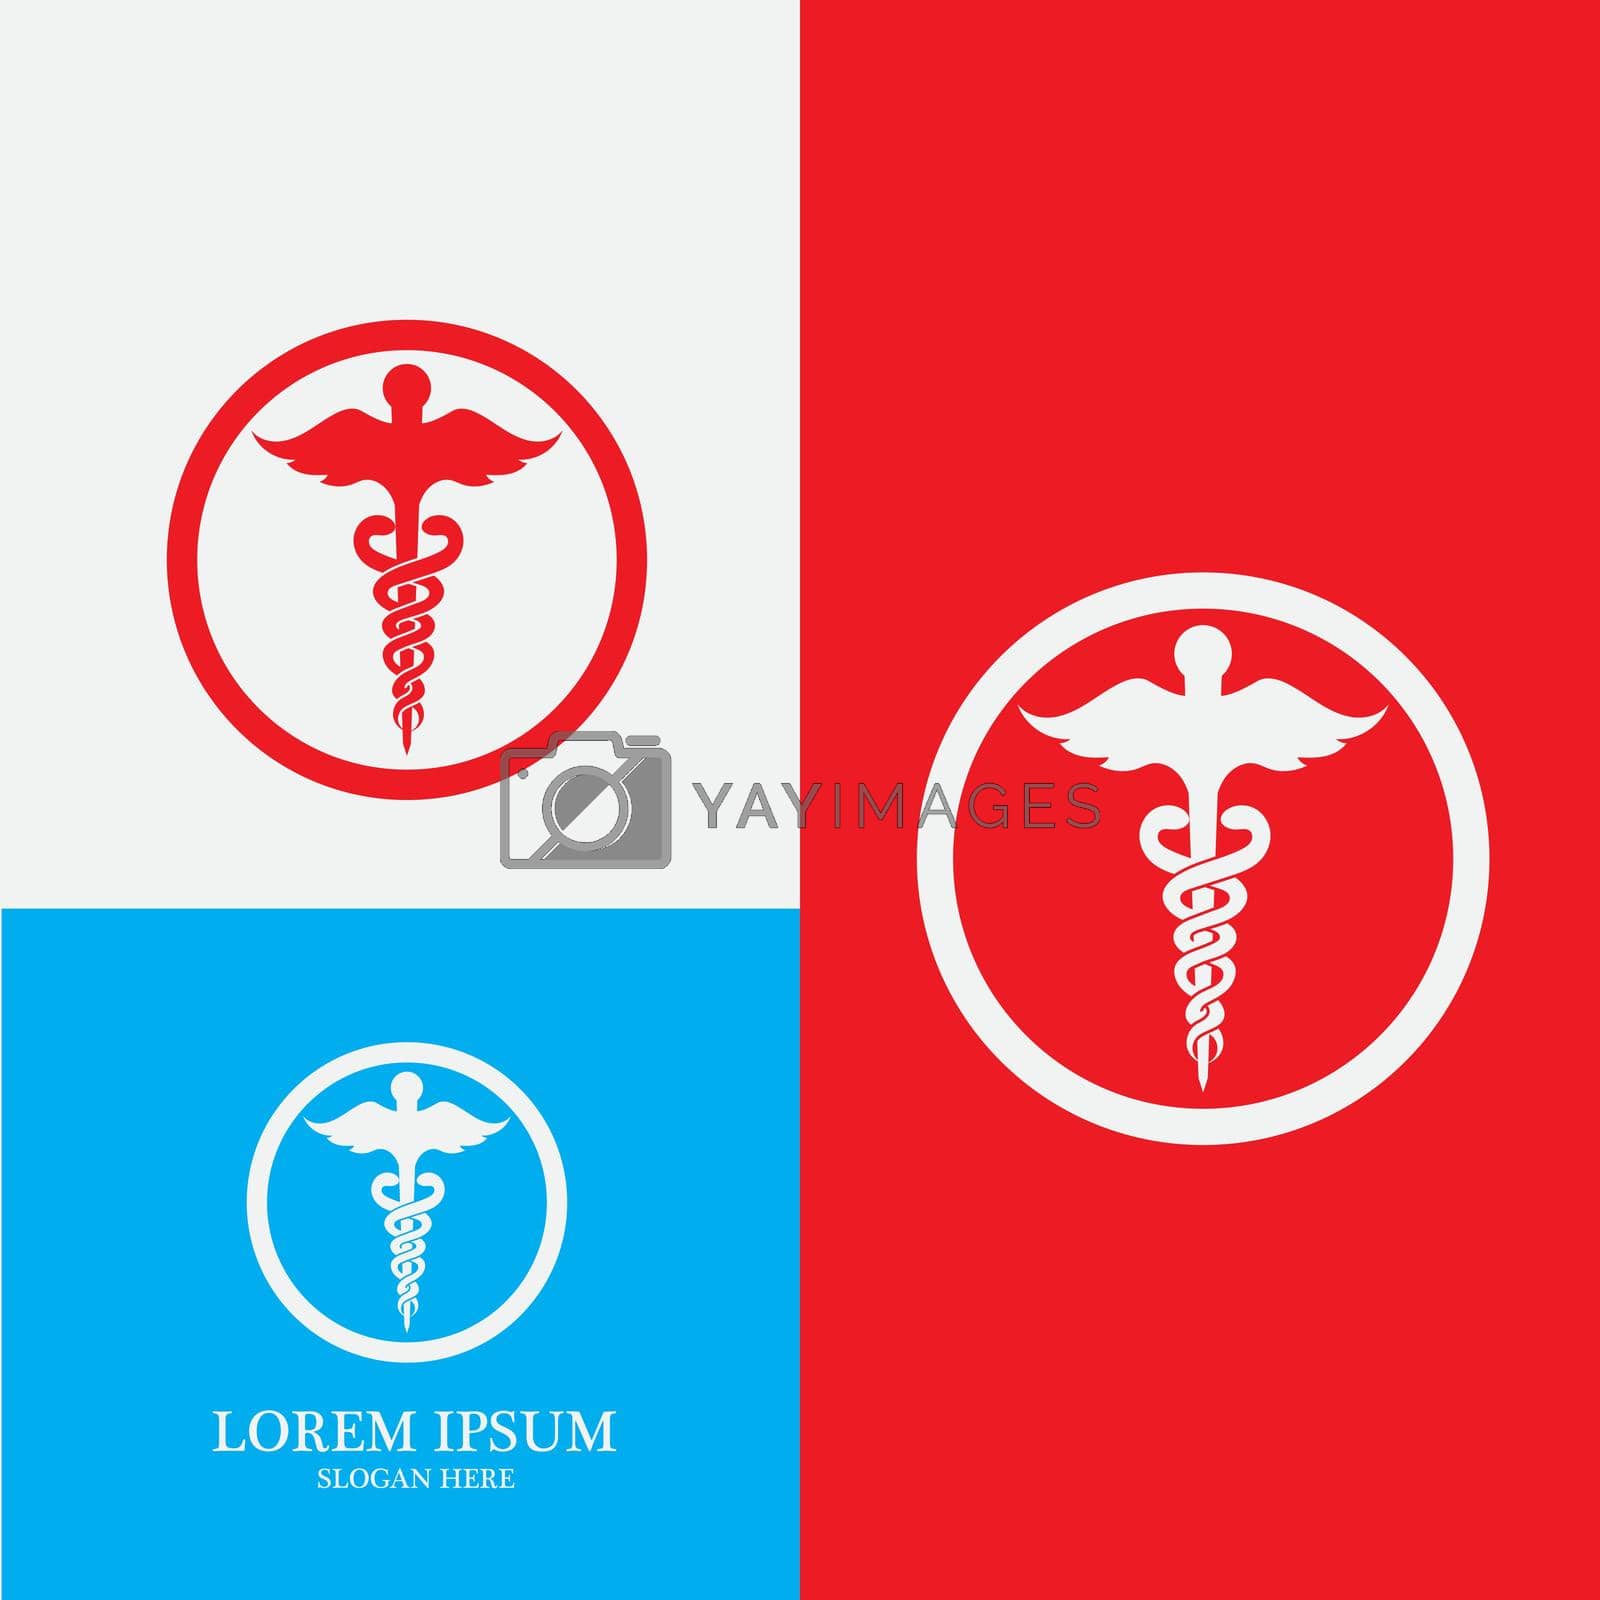 Royalty free image of medical snake icon vector illustration  by Mrsongrphc